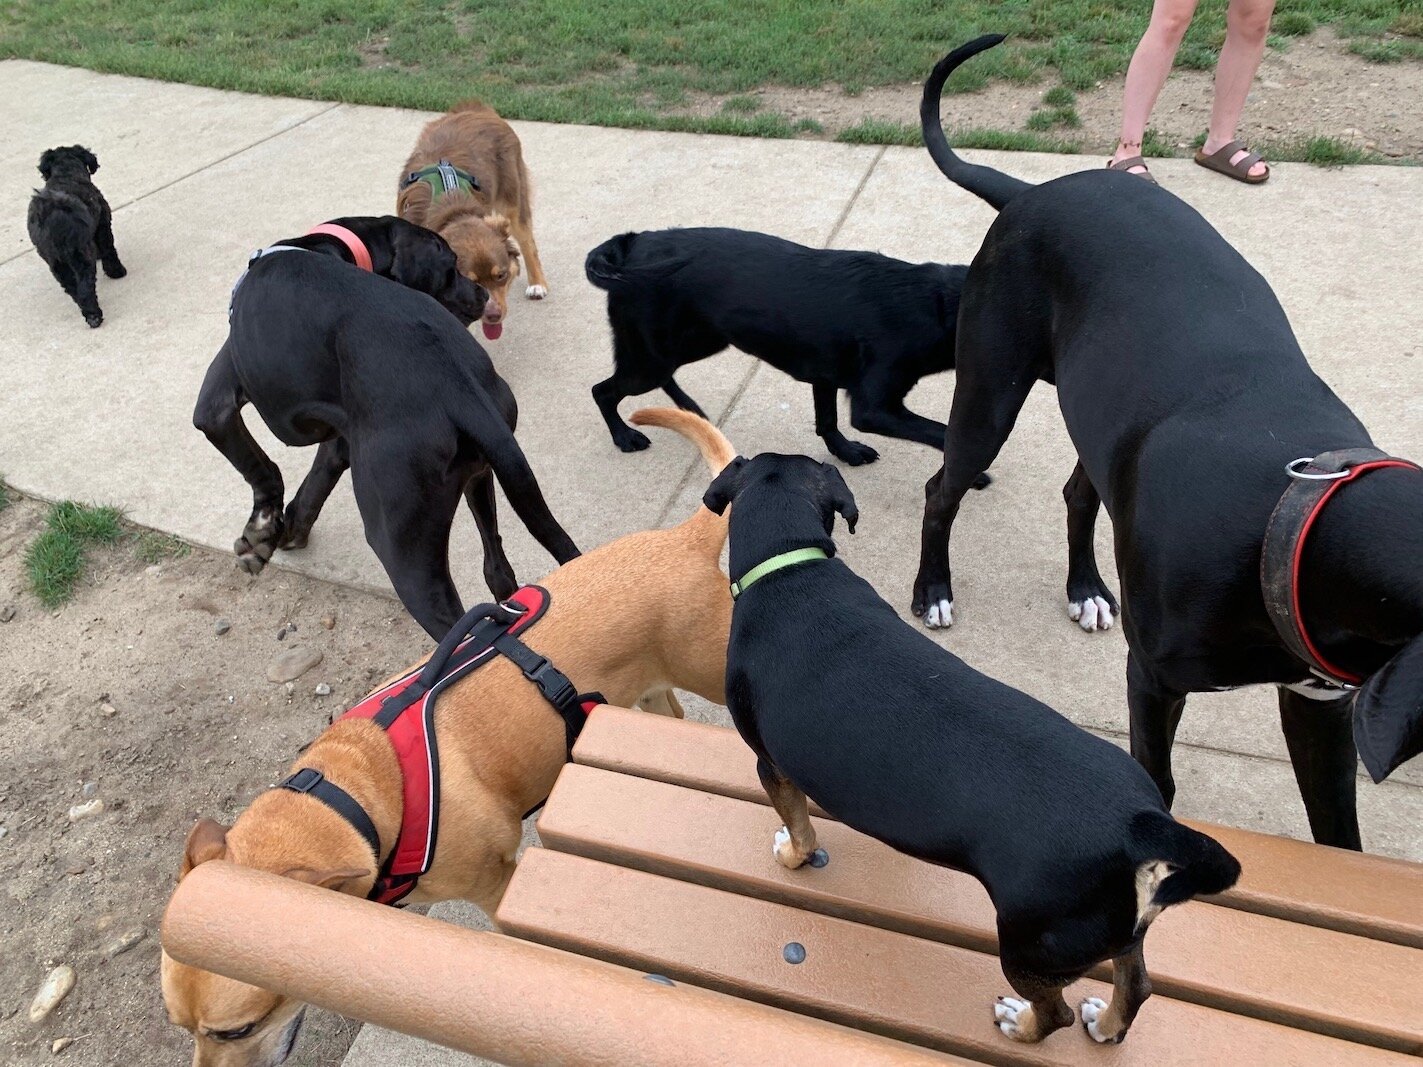 Finley, a Dachshund and miniature pincher mix, stands on a bench seeming to supervise an afternoon meeting of other dogs at Fairmount Dog Park.